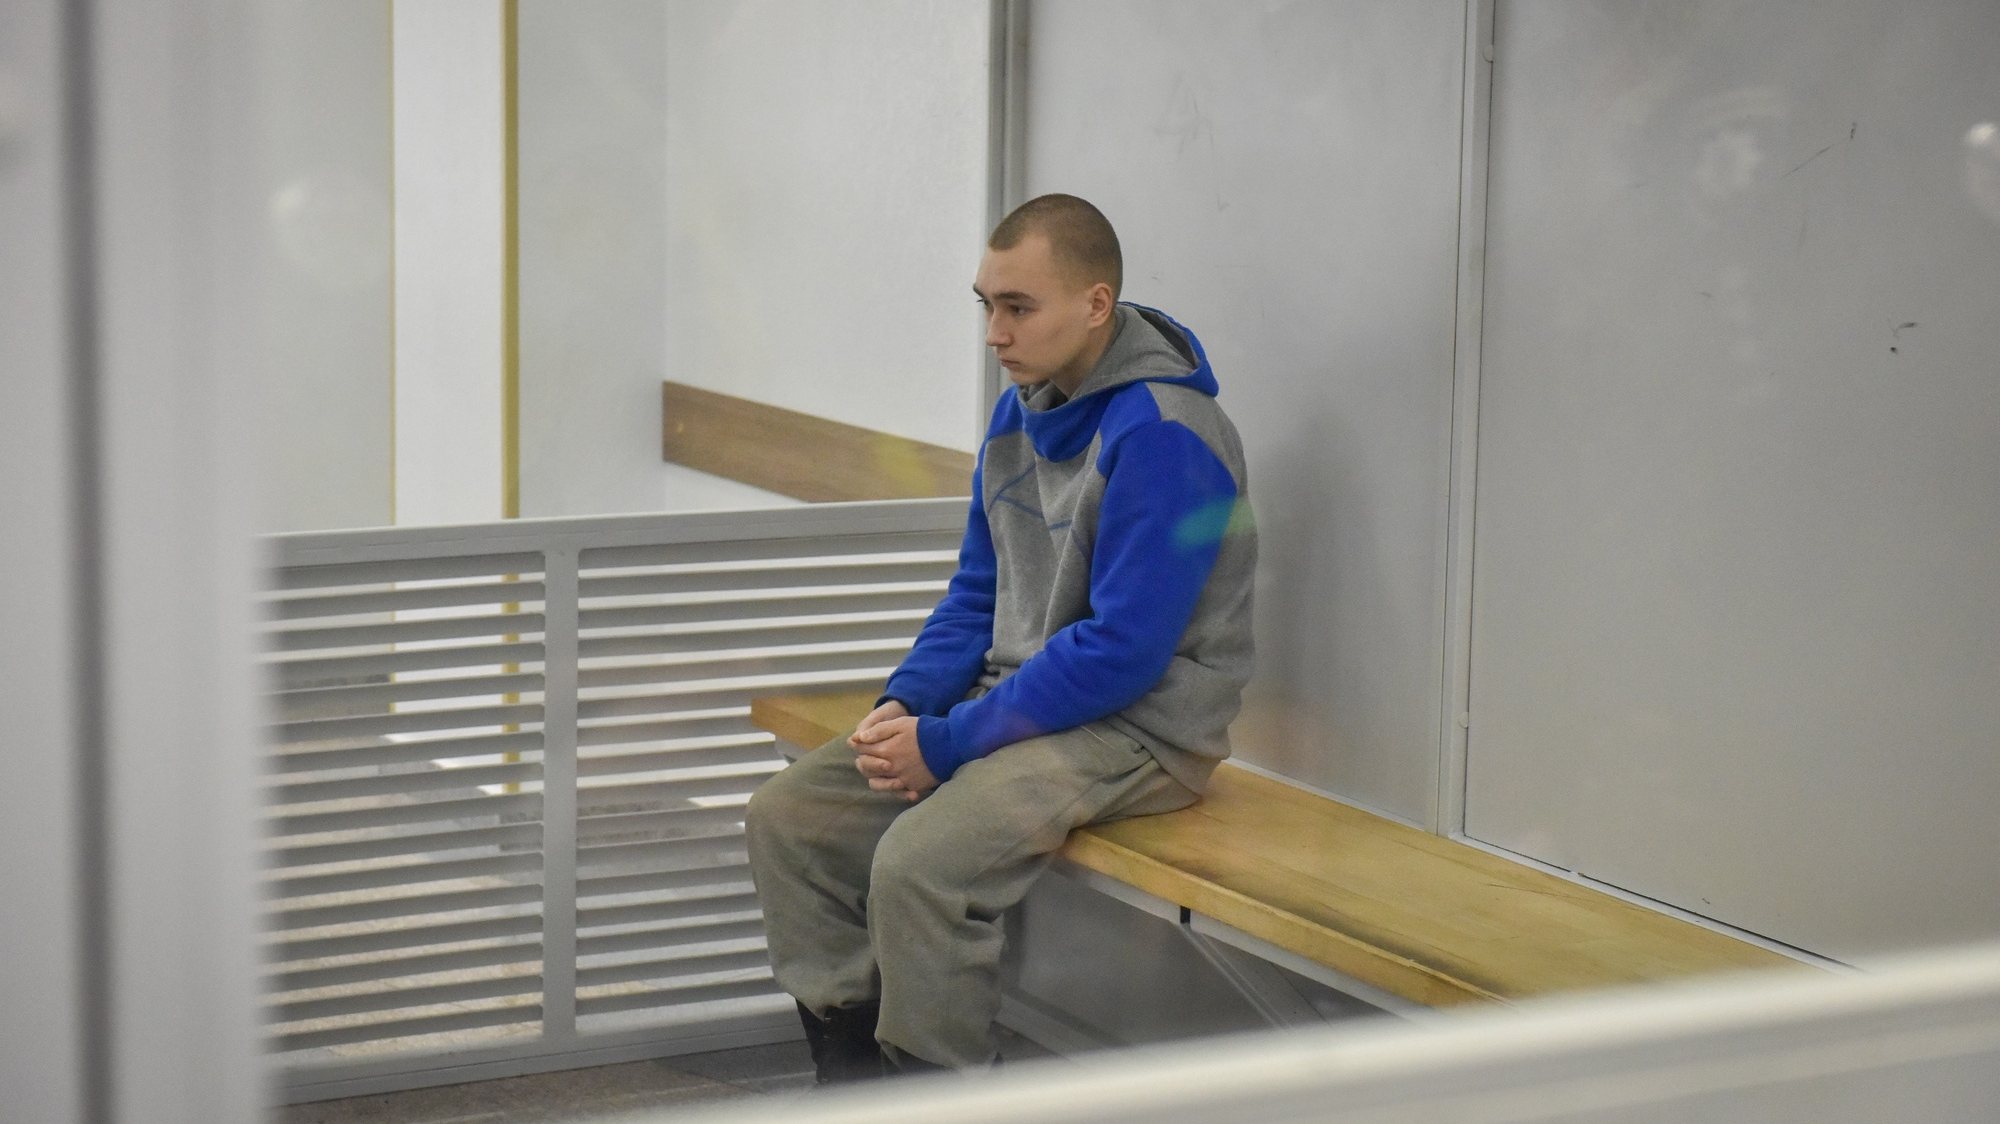 epa09968839 Russian serviceman Vadim Shishimarin attends a court hearing in the Solomyansky district court in Kyiv, Ukraine, 23 May 2022. Russian serviceman Vadim Shishimarin, 21, was sentenced to life imprisonment for the killing of an unarmed 62-year-old civilian man near Chupakha village in the Sumy area in late February 2022. A court in Kyiv ruled on the day that Shishimarin has been found guilty of war crimes and handed a life sentence. Ukraine held the first war crimes trial amid the Russian invasion.  EPA/OLEG PETRASYUK